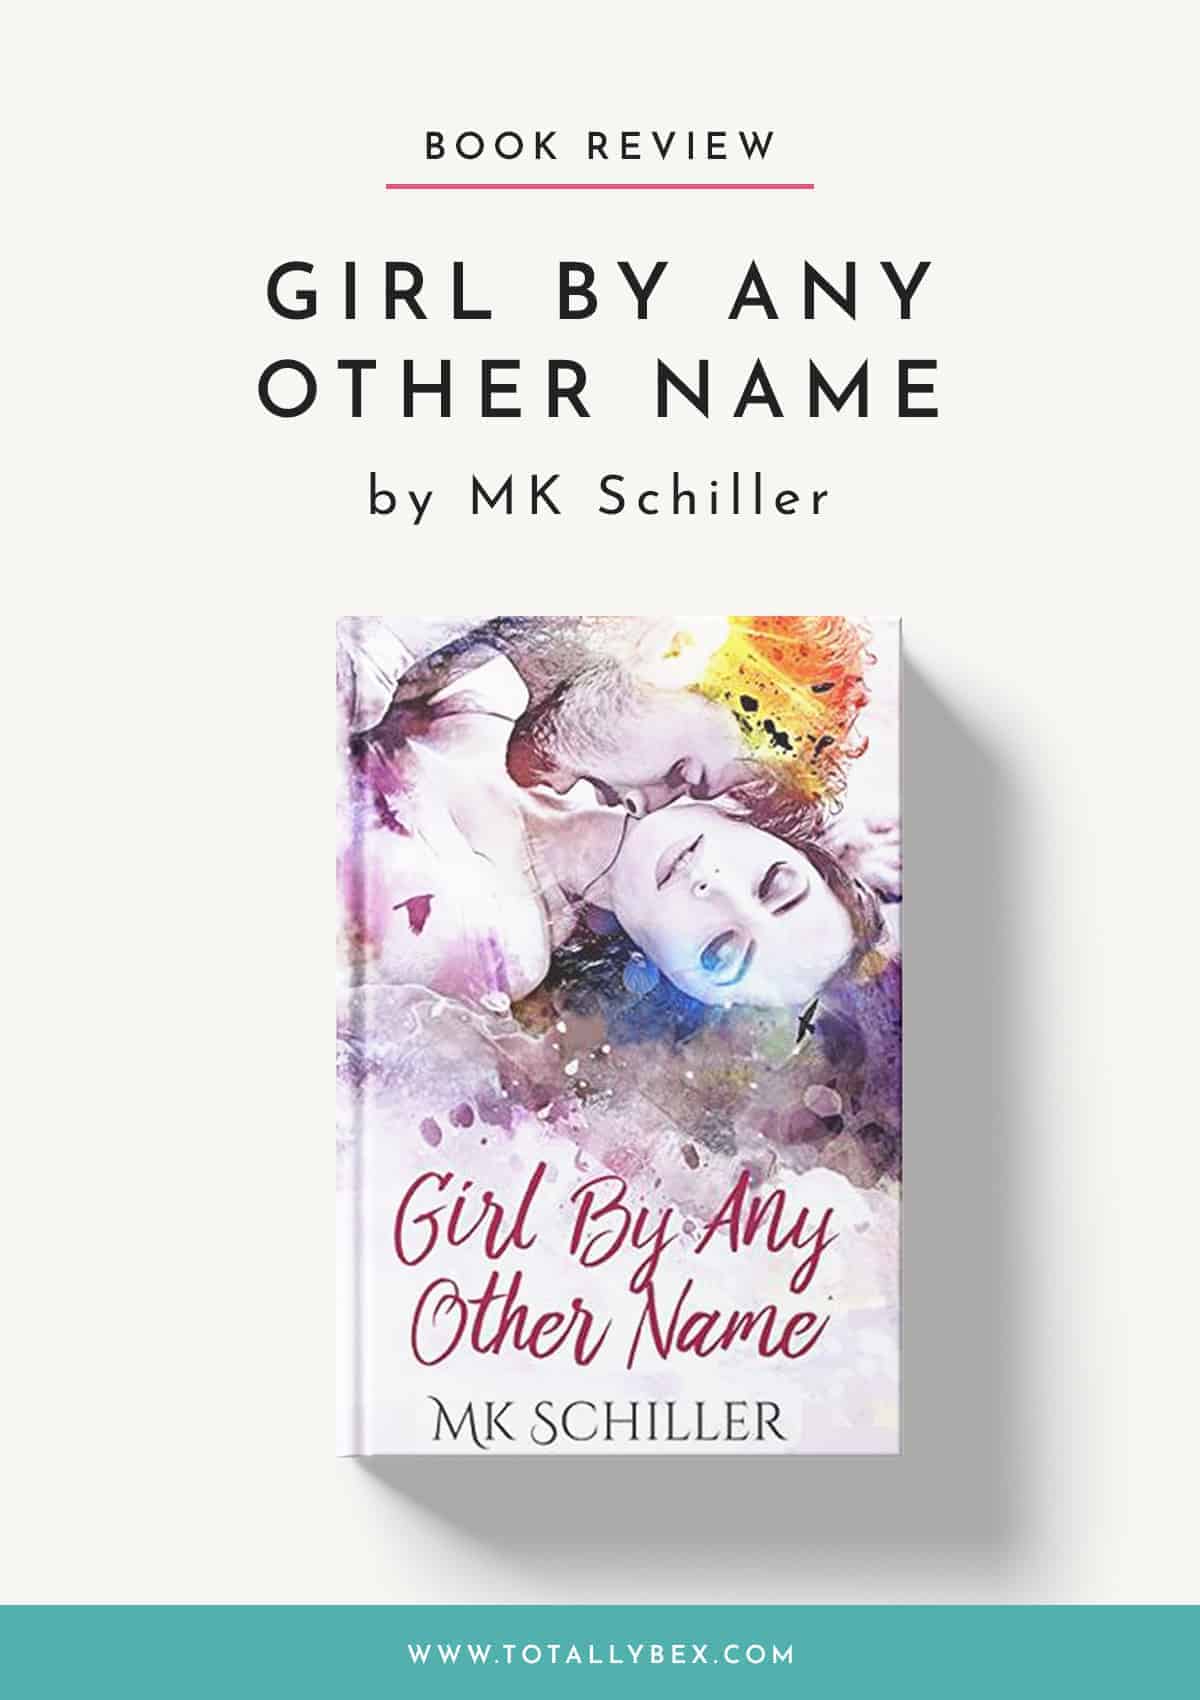 Girl By Any Other Name by MK Schiller-Book Review